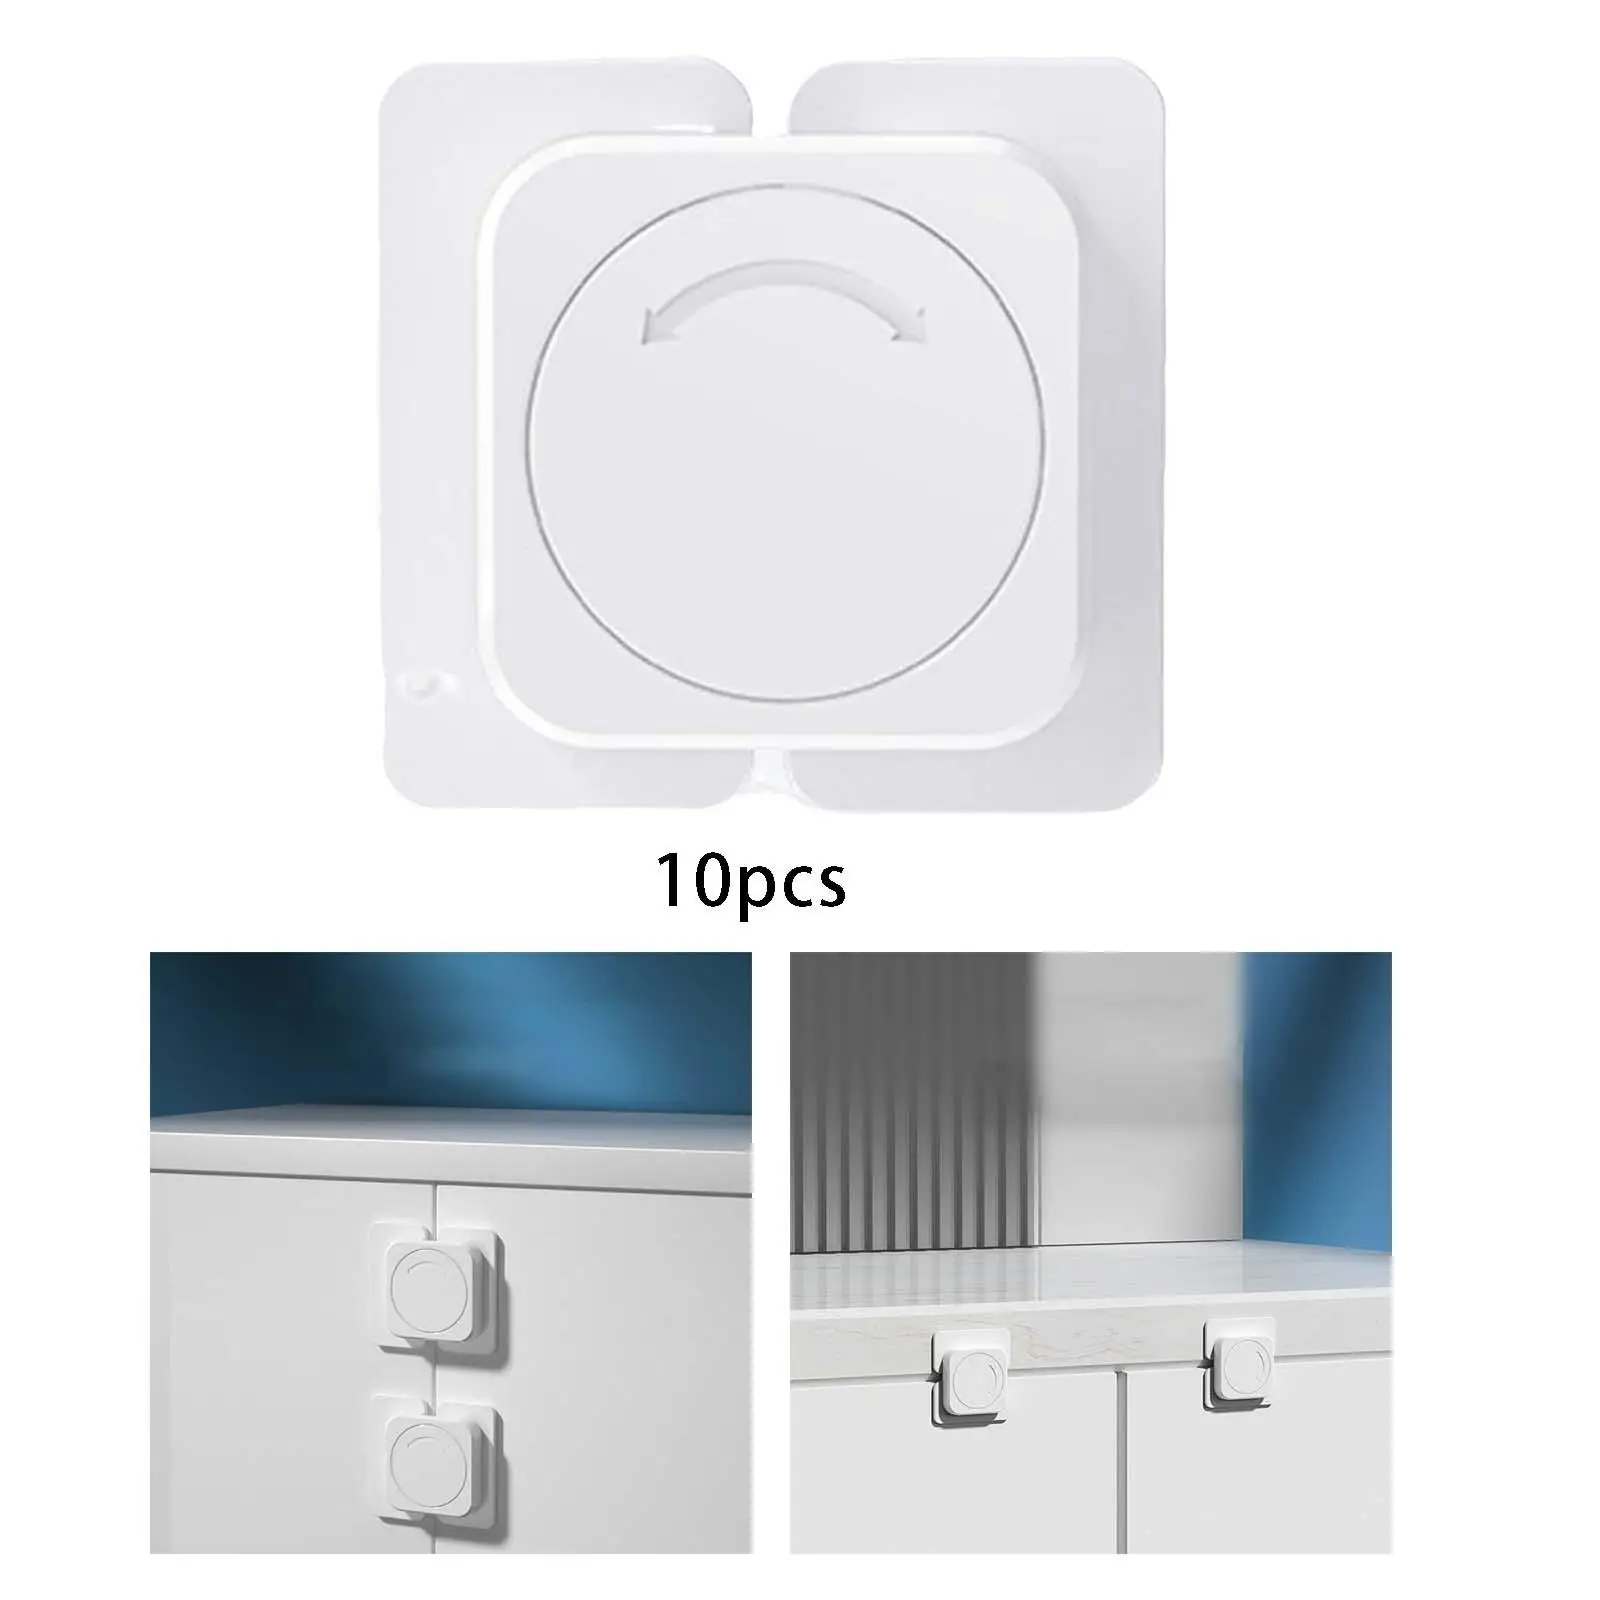 10Pcs Adhesive Safety Rotary Lock Kids Doors Locks for Cabinets Drawer Oven